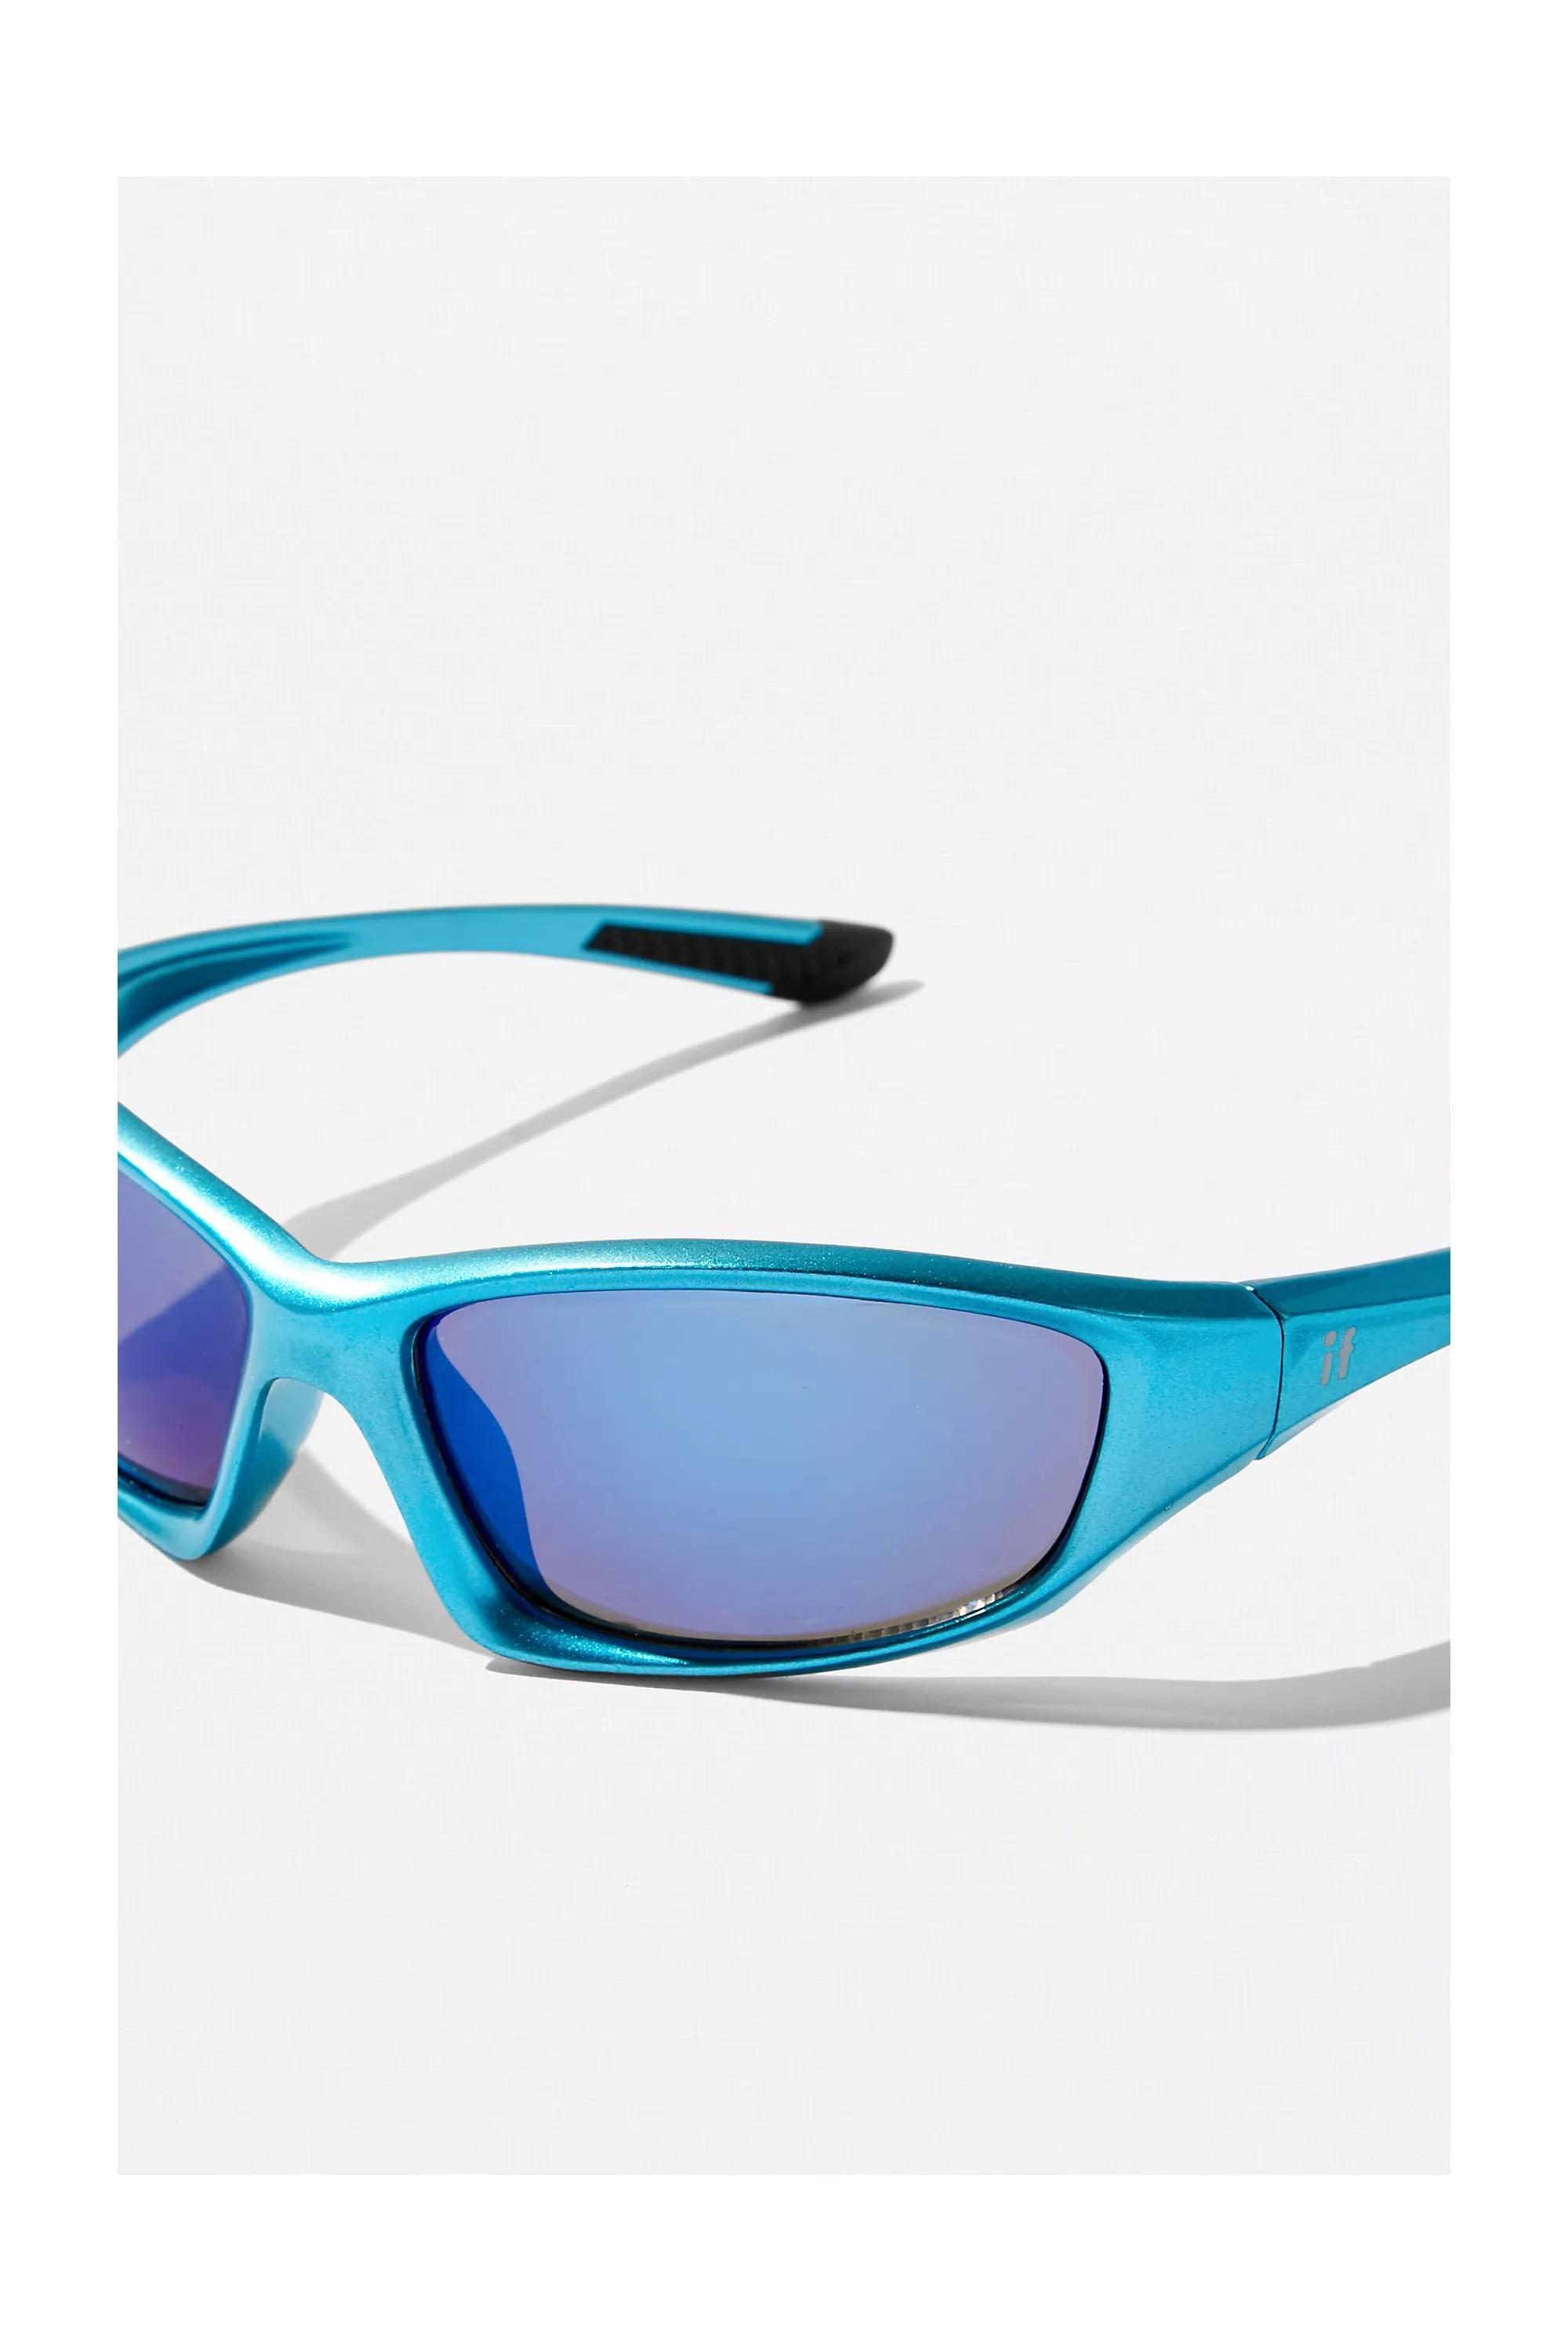 Urban Outfitters - Blue Recycled Abbie Wrap Around Sunglasses